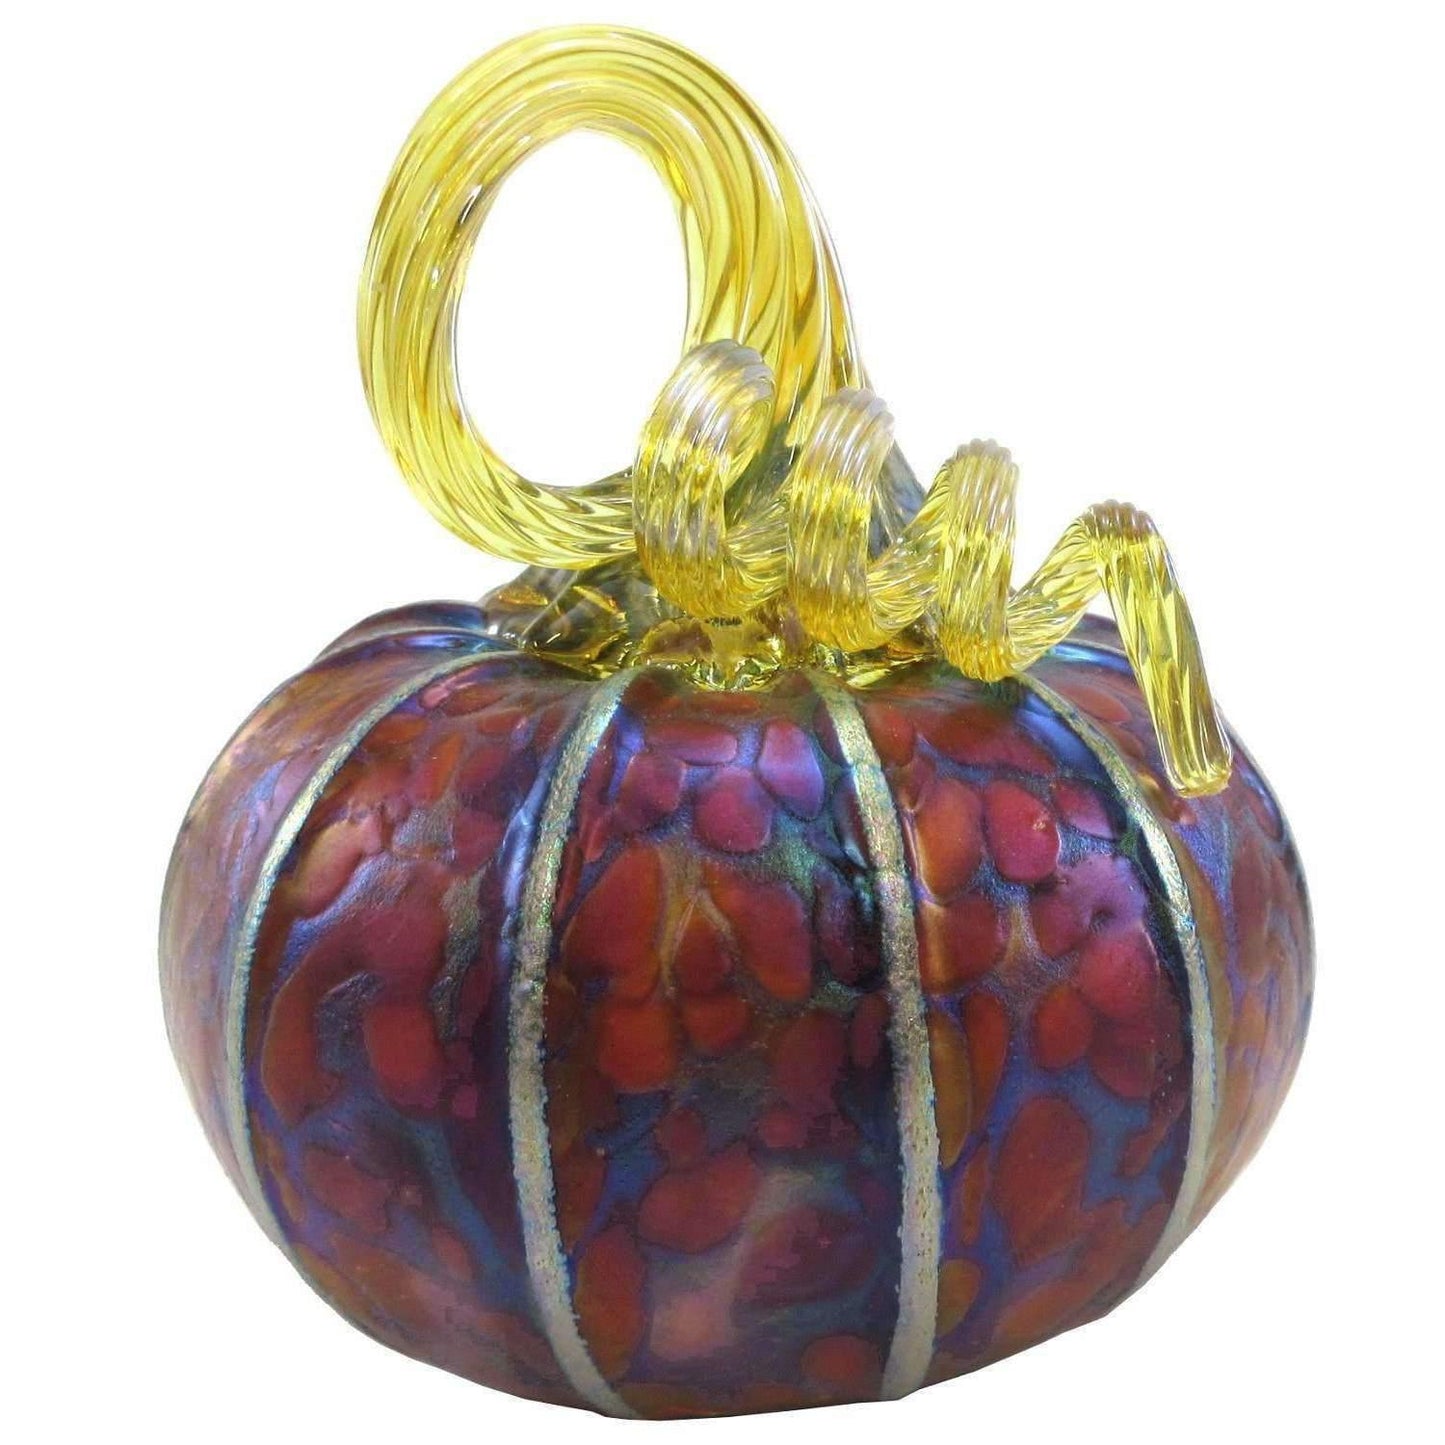 Blown Glass Pumpkin in Burgundy Gifts Furnace Glass Works Large 